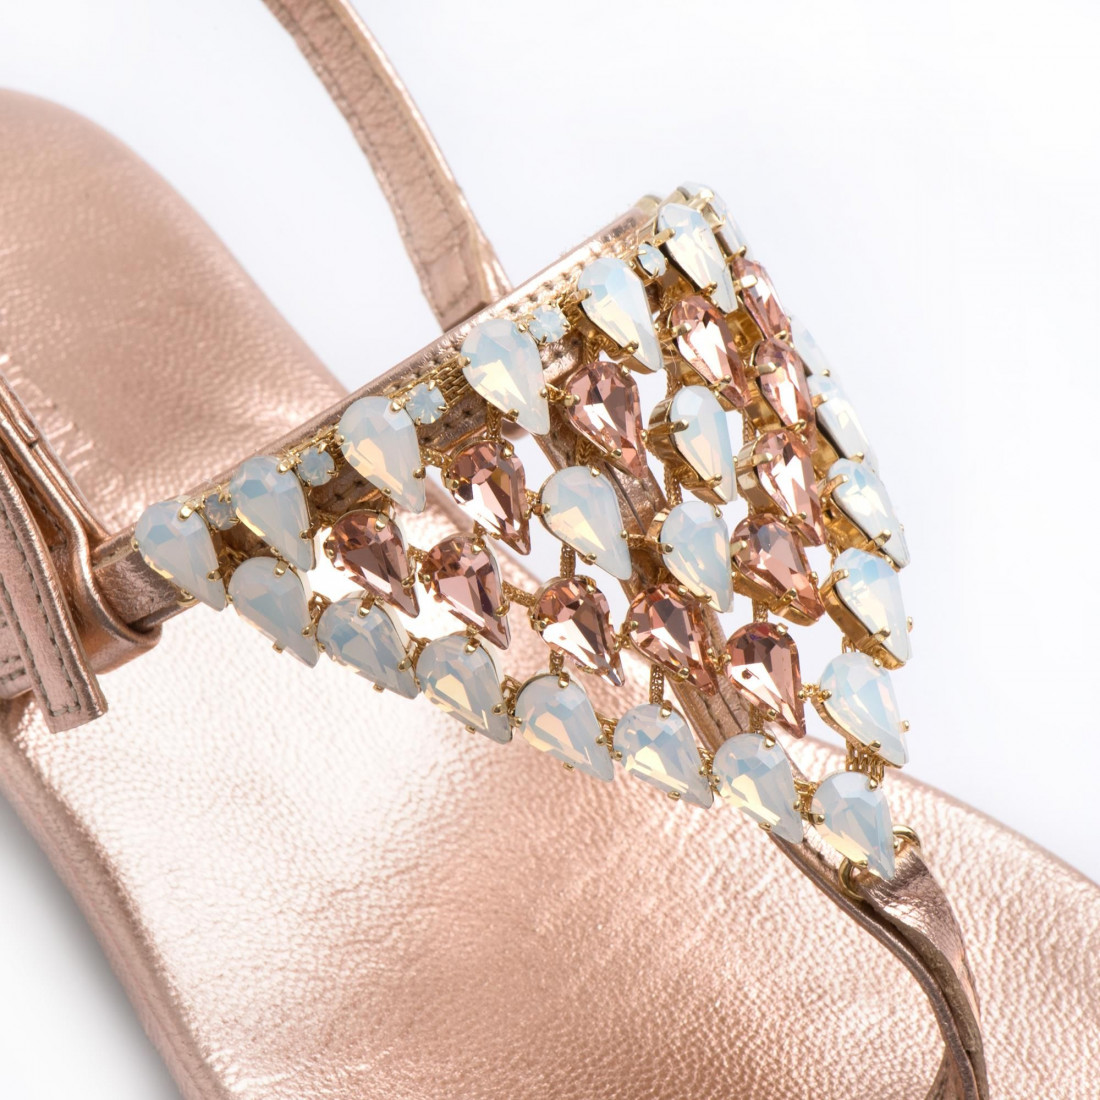 Flip flop sandals in copper leather with strass